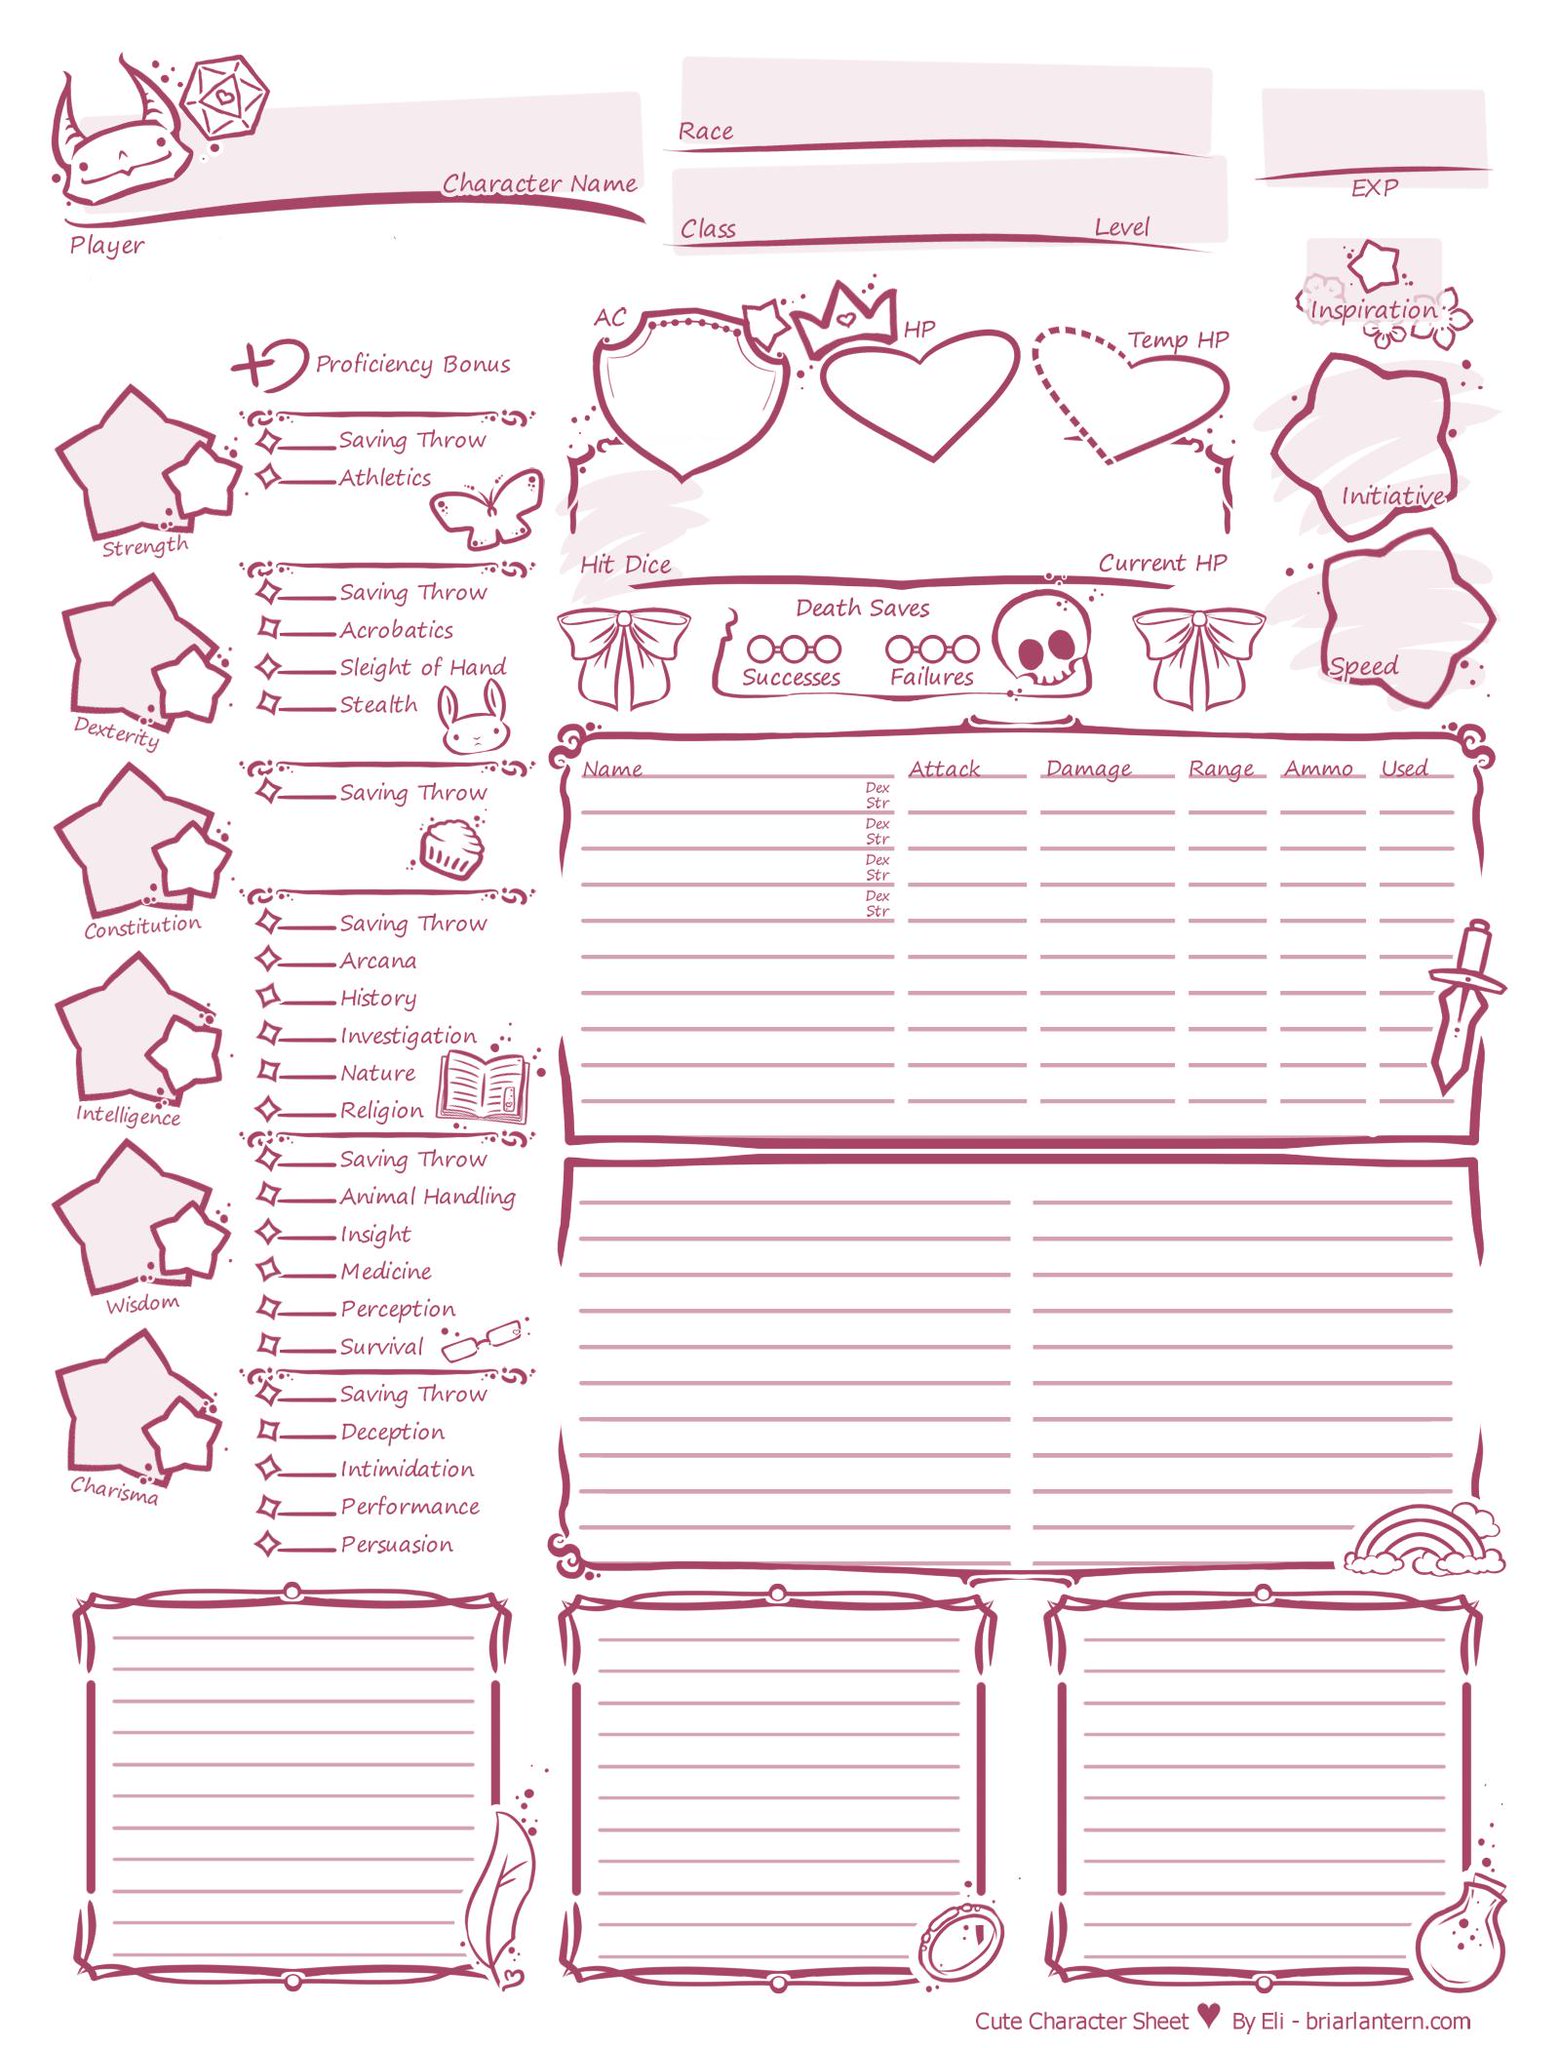 Eli Storm I Made A Cute Character Sheet For 5e Dnd5e Dungeonsanddragons T Co In9dlhne71 Twitter